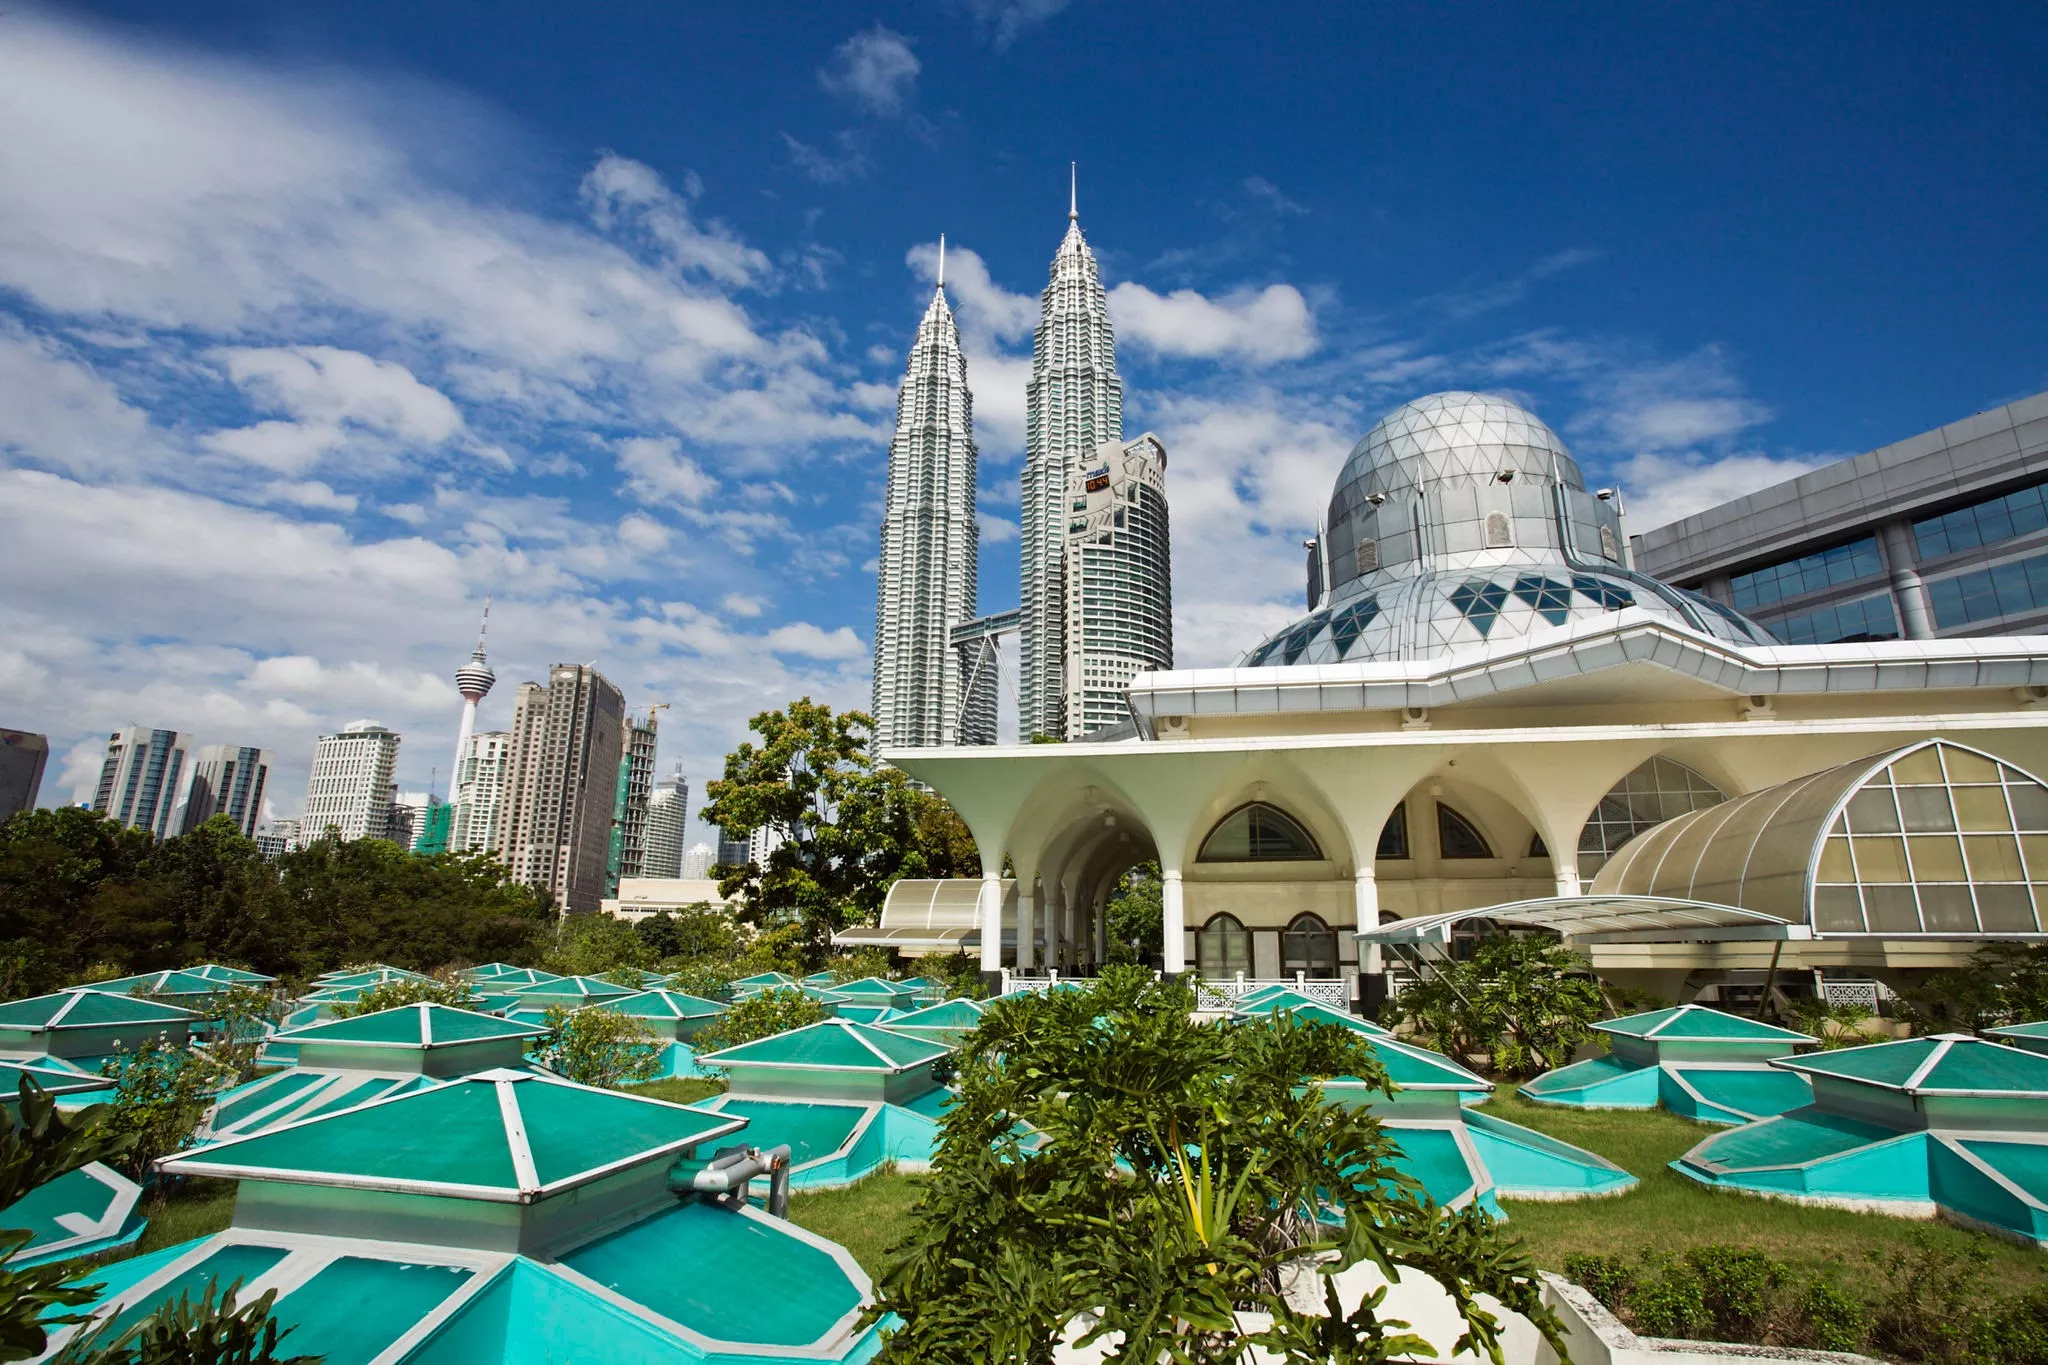 As Siakirin Mosque in Malaysia, East Asia | Architecture - Rated 3.8